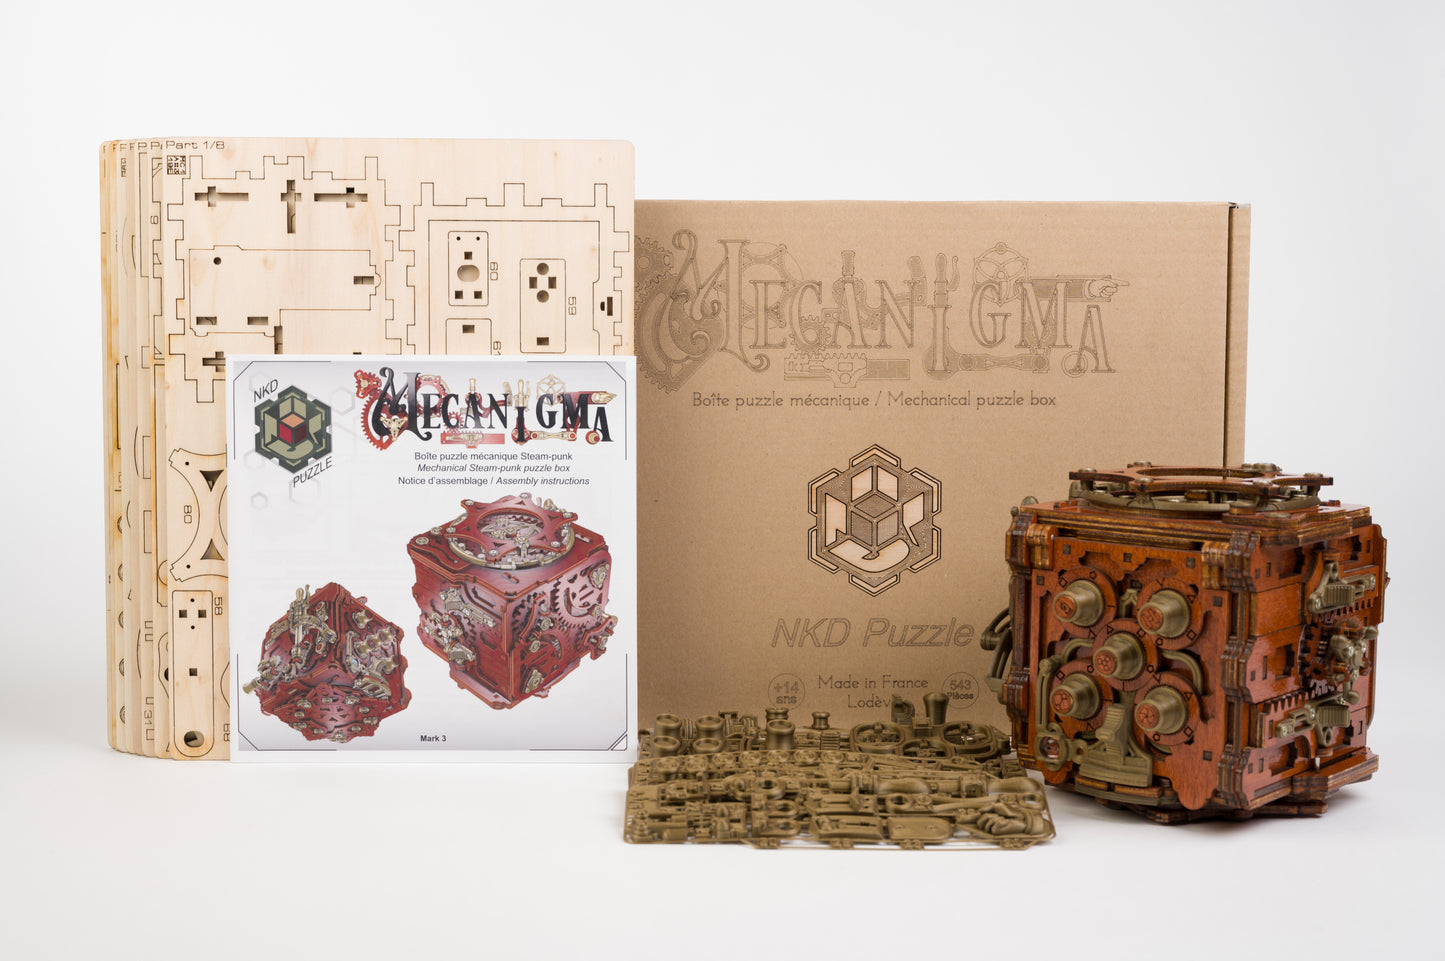 Mecanigma Kit – NKD-Puzzle: Das ultimative Holzpuzzle-Erlebnis